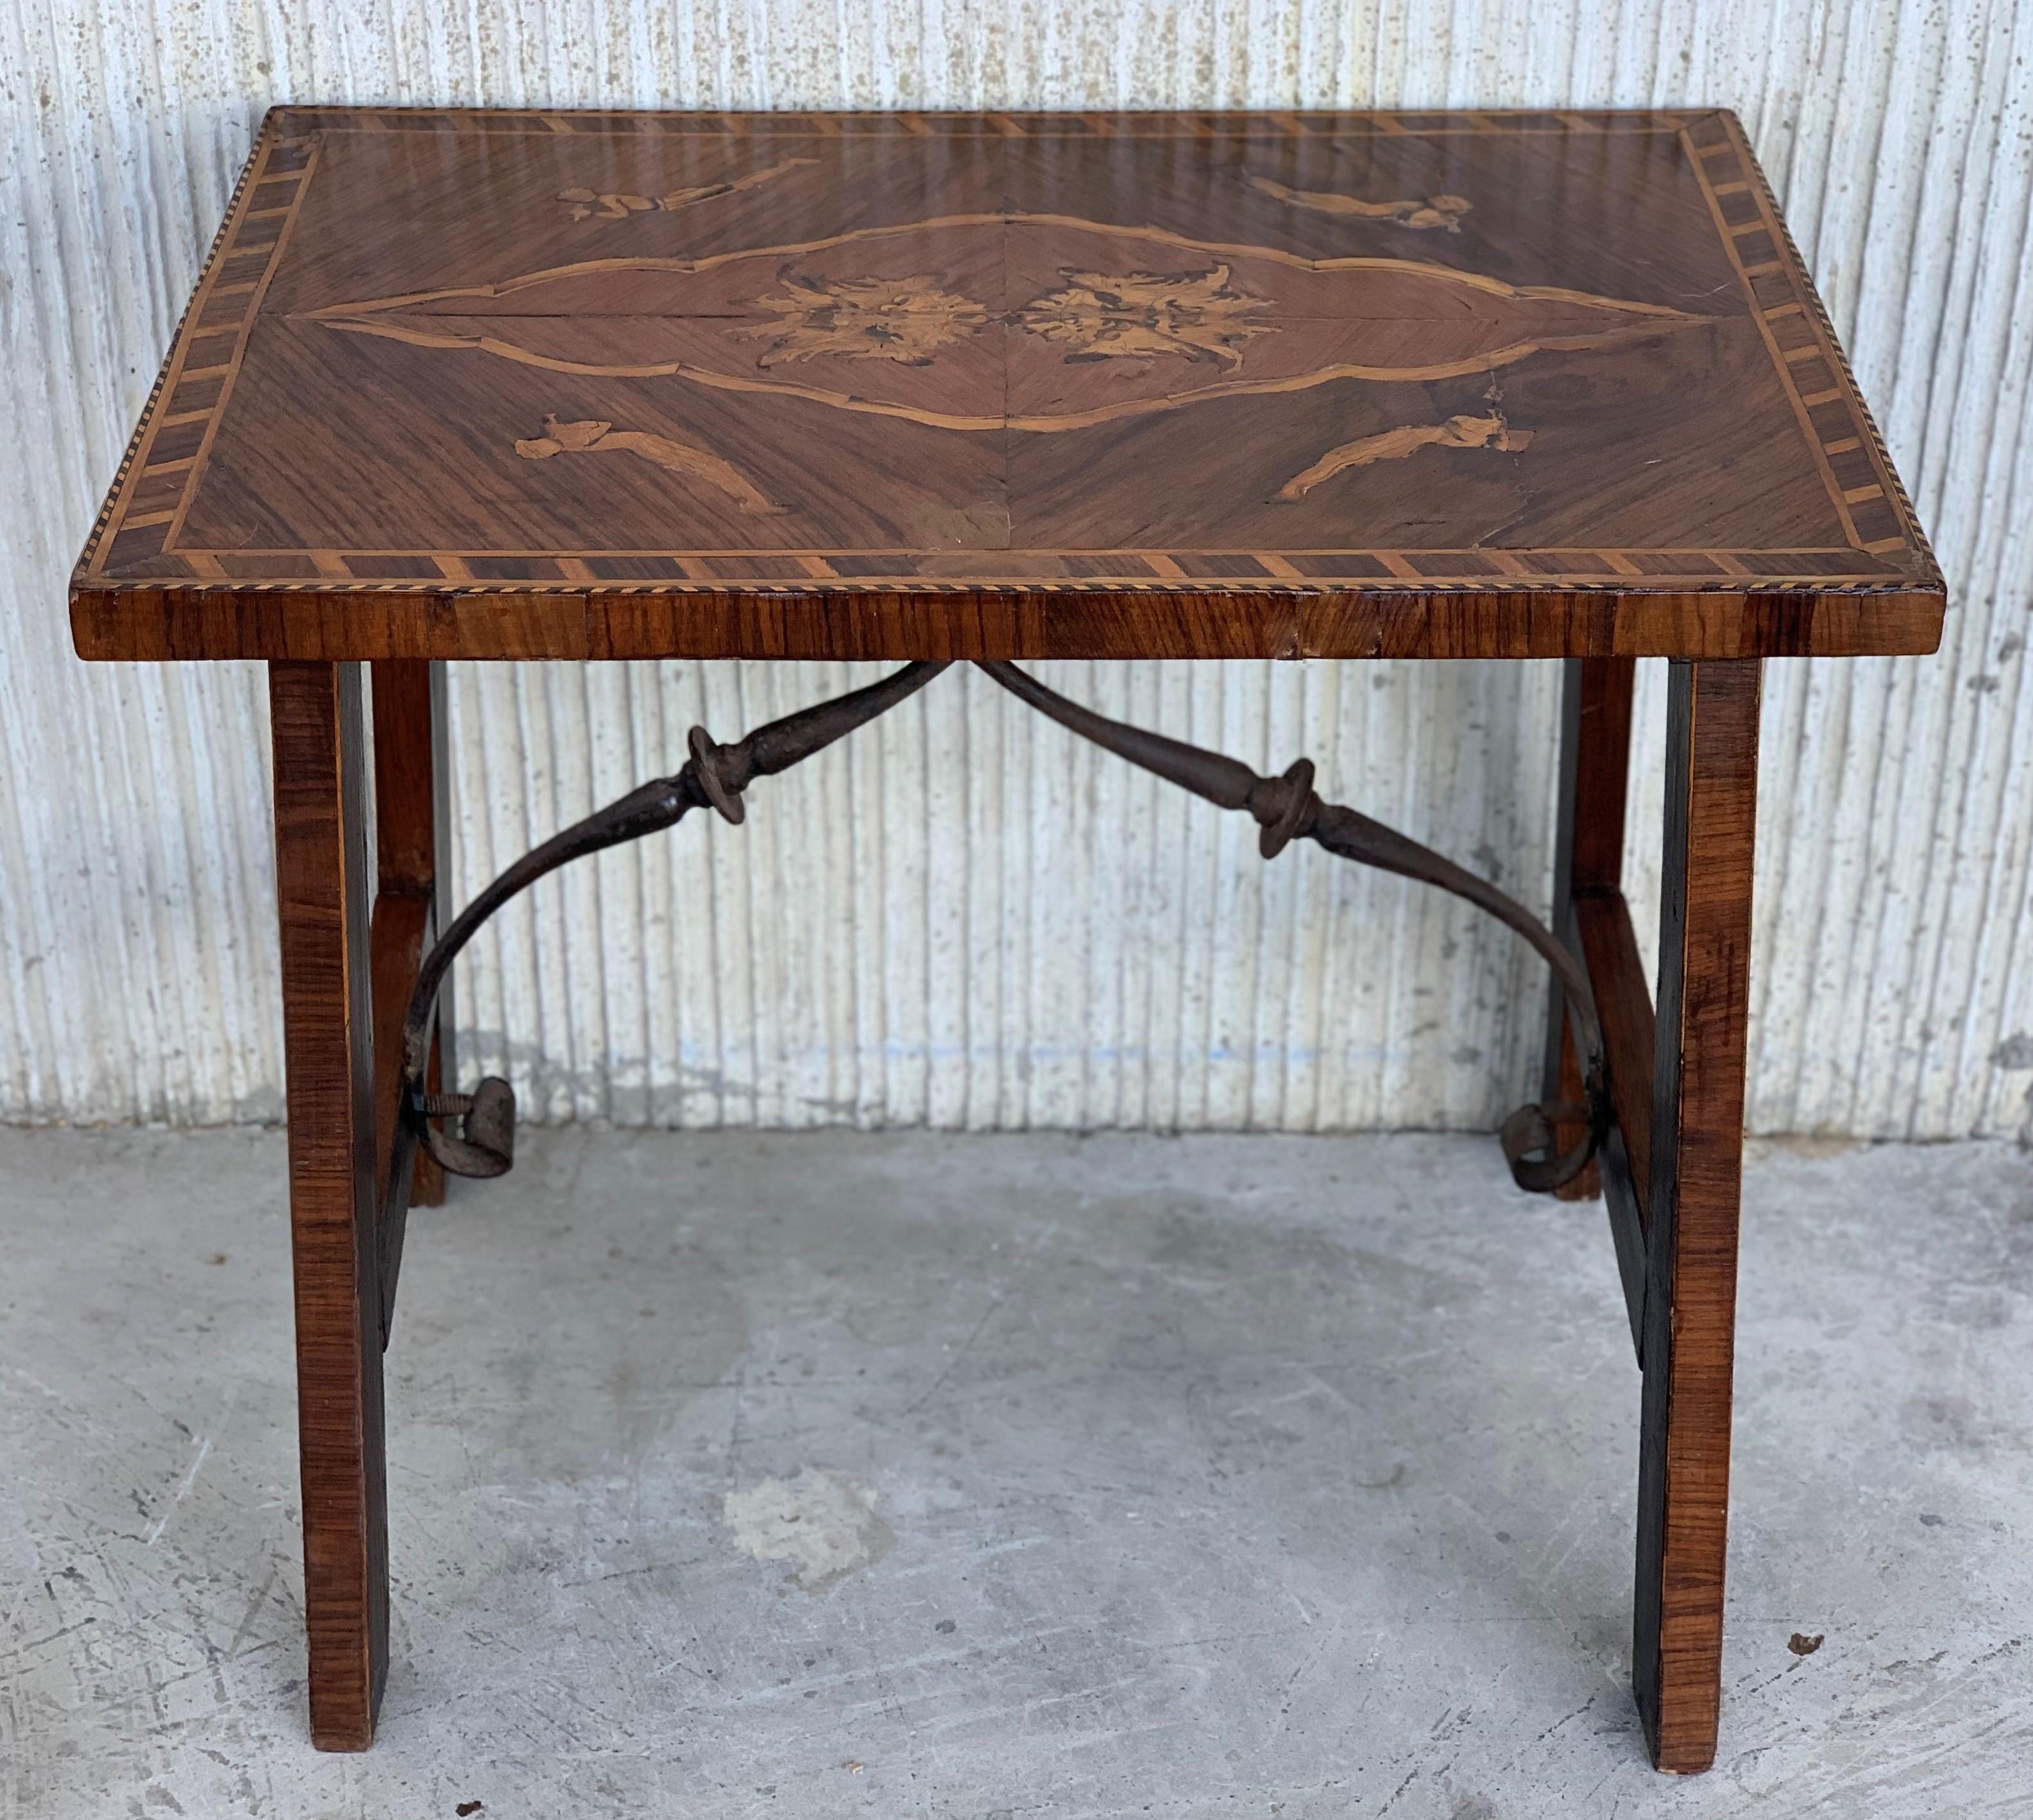 19th century Spanish trestle table in mahogany. with Marquetry top featuring two head lions in the center top and four cherubs in the corner tops and marquetry in the four legs.
This piece has a great scale, lovely legs and beautiful marquetry top.